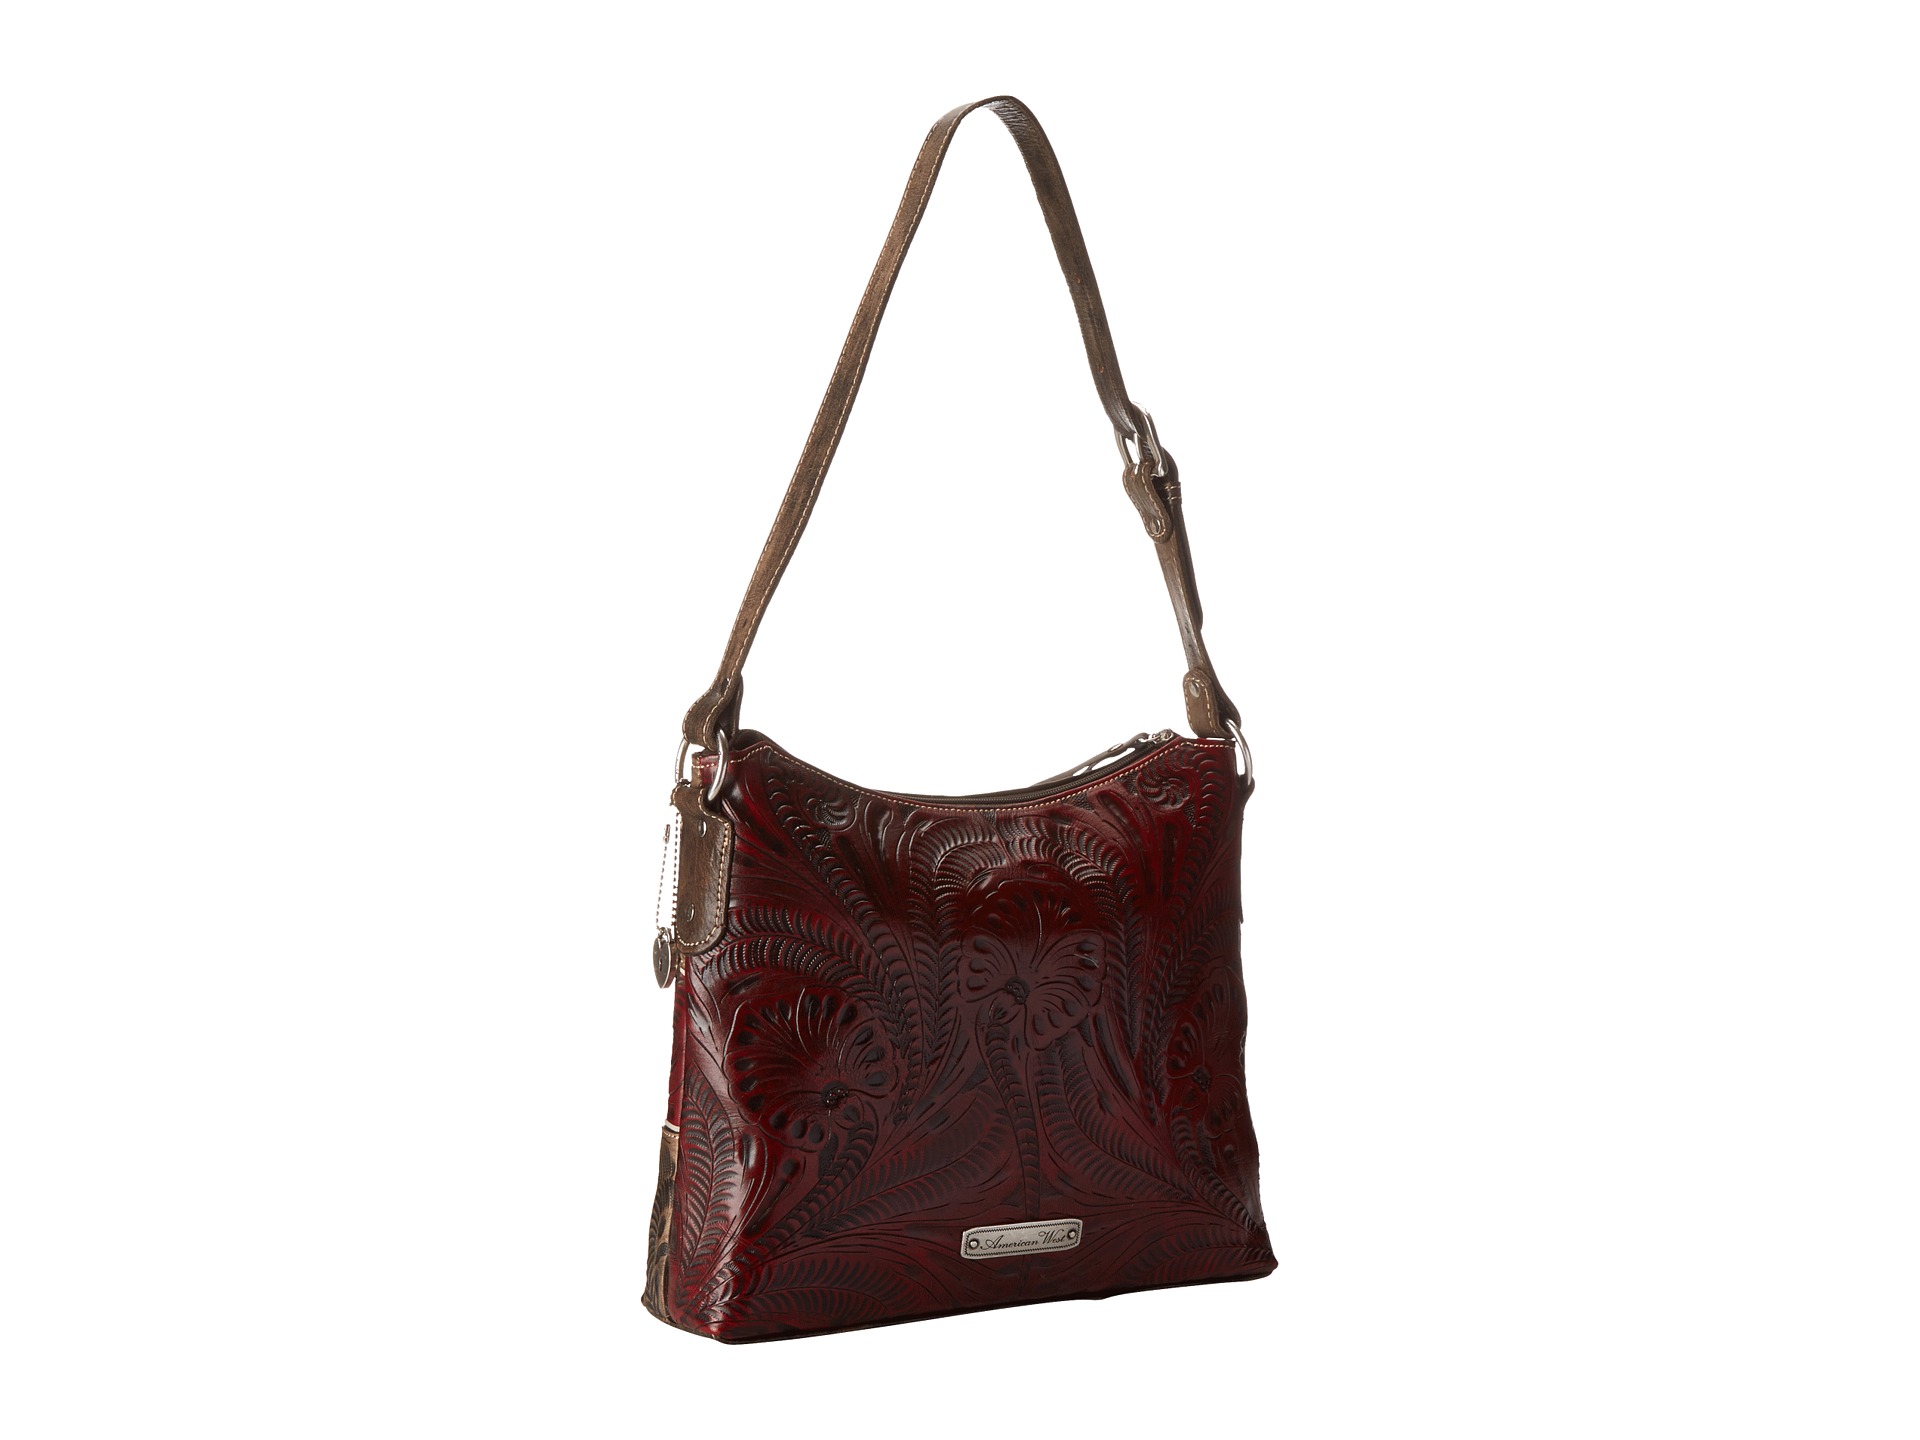 American West Eagle Heart Shoulder Bag | Shipped Free at Zappos